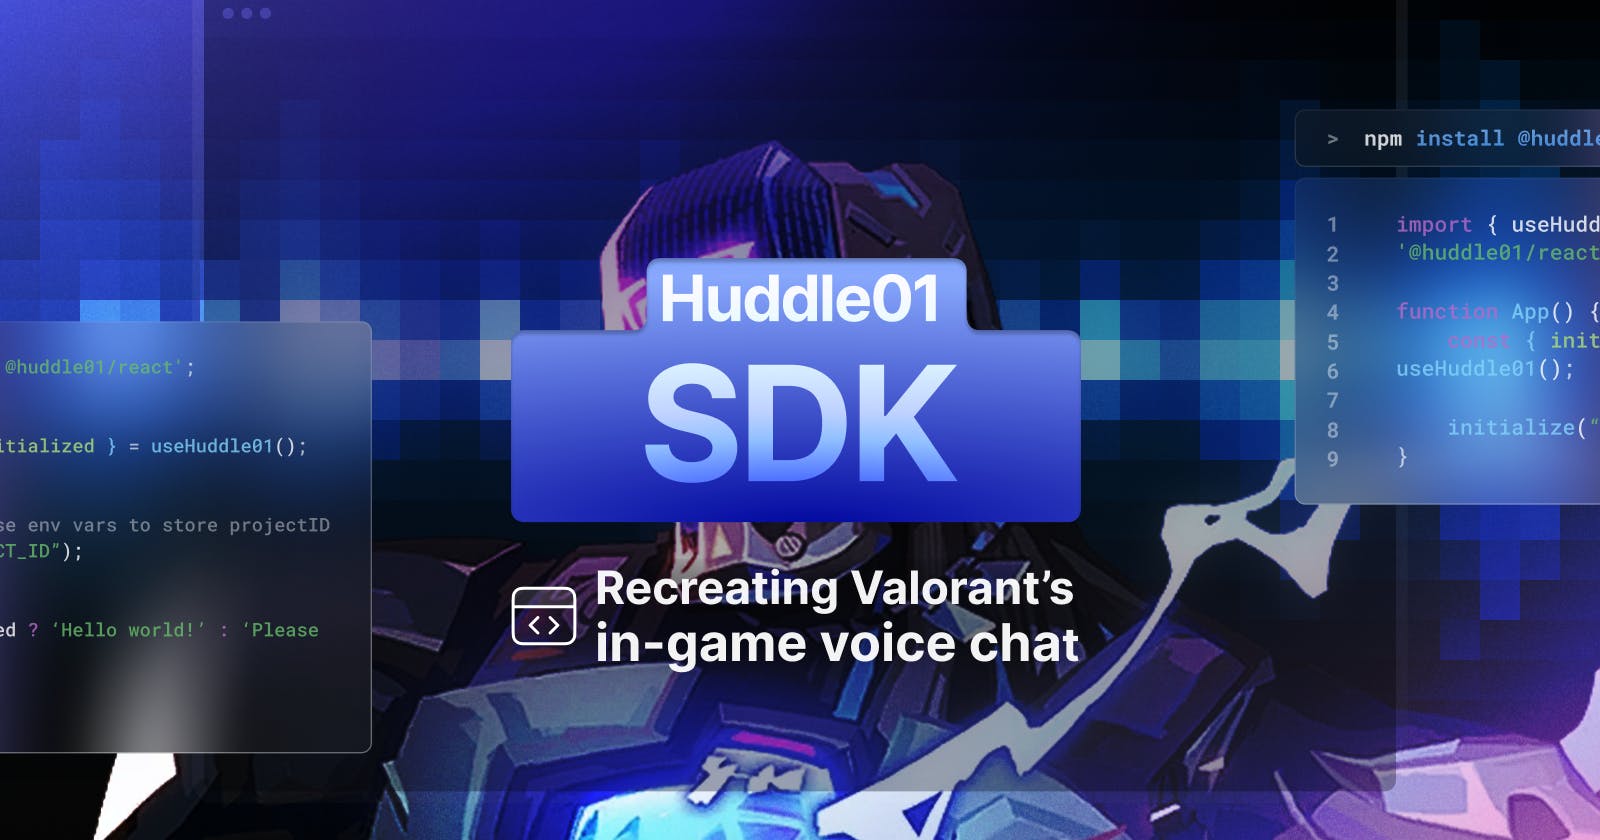 Recreating Valorant’s in-game voice chat system using Huddle01 SDK ⚔️ 🎙